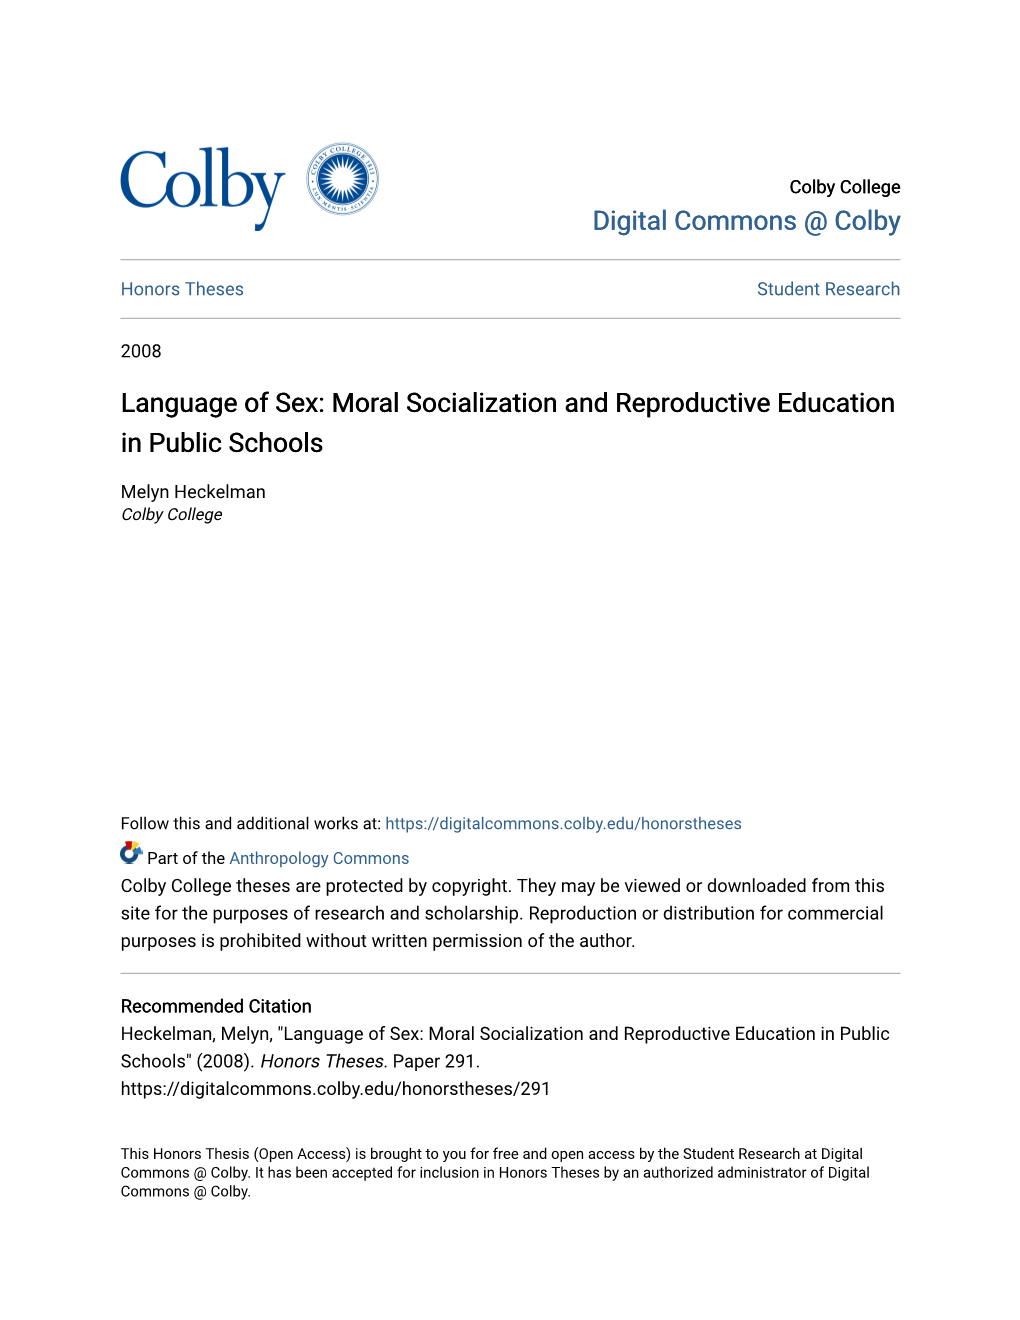 Language of Sex: Moral Socialization and Reproductive Education in Public Schools